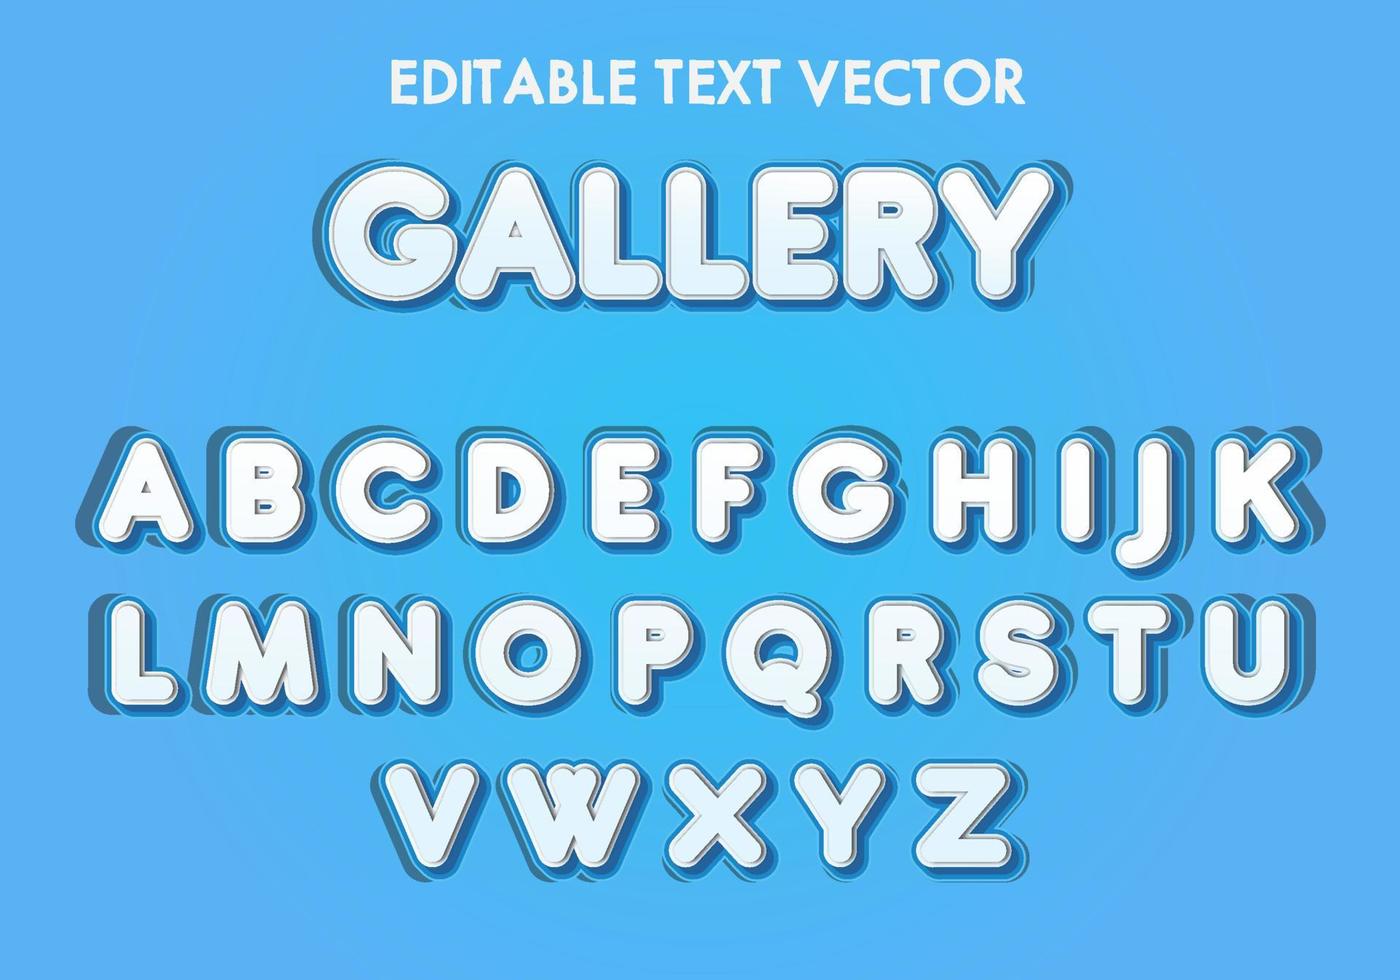 Gallery text effect vector editable simple blue and white